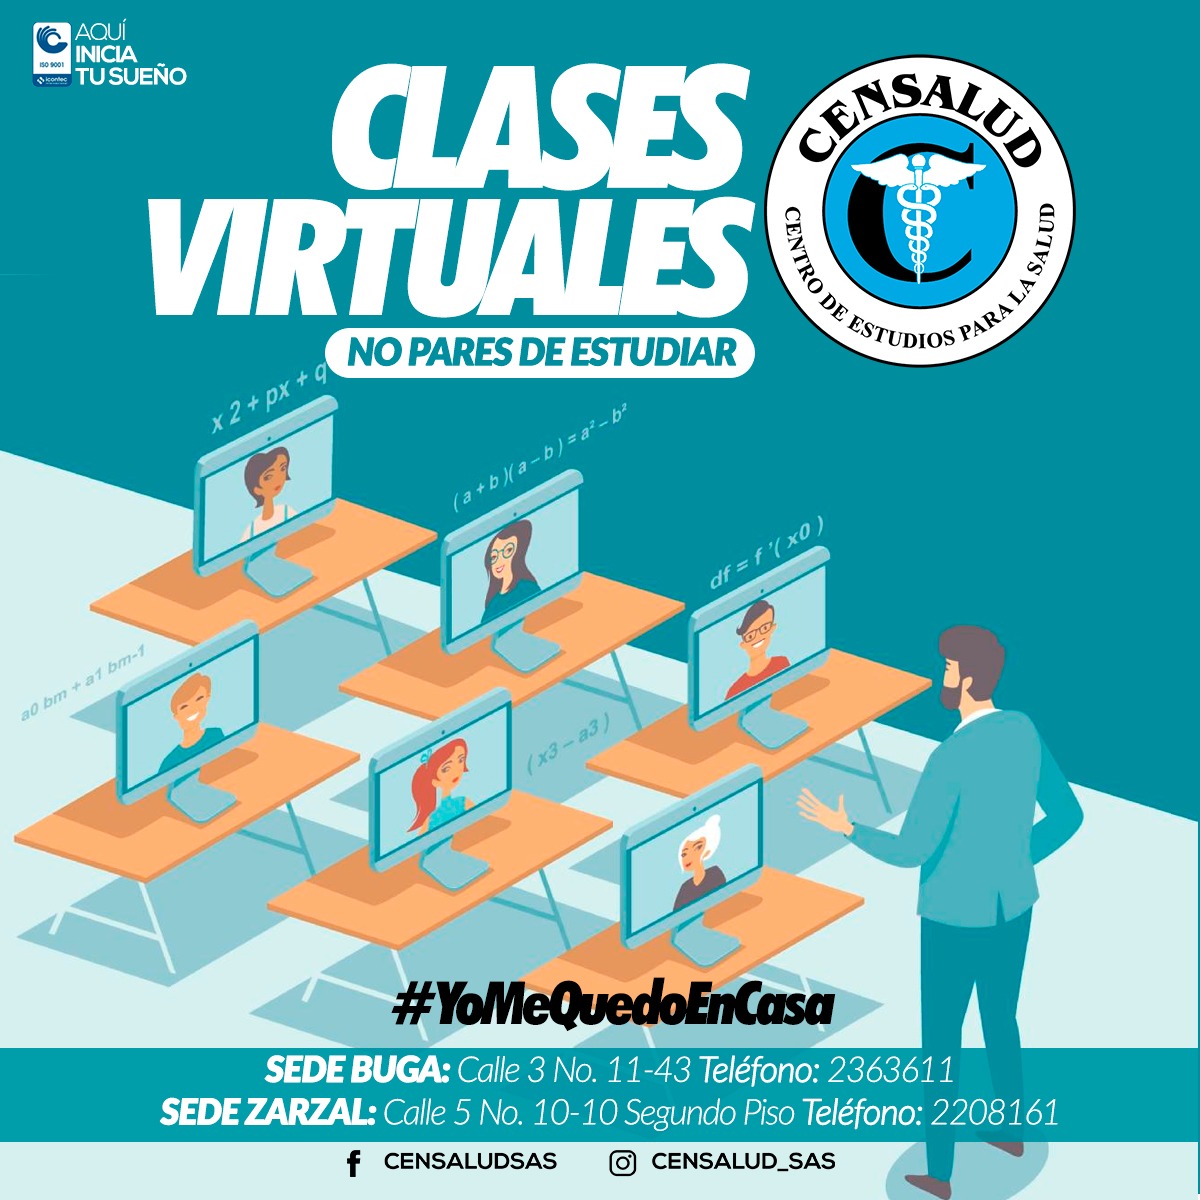 CLASES VIRTUALES